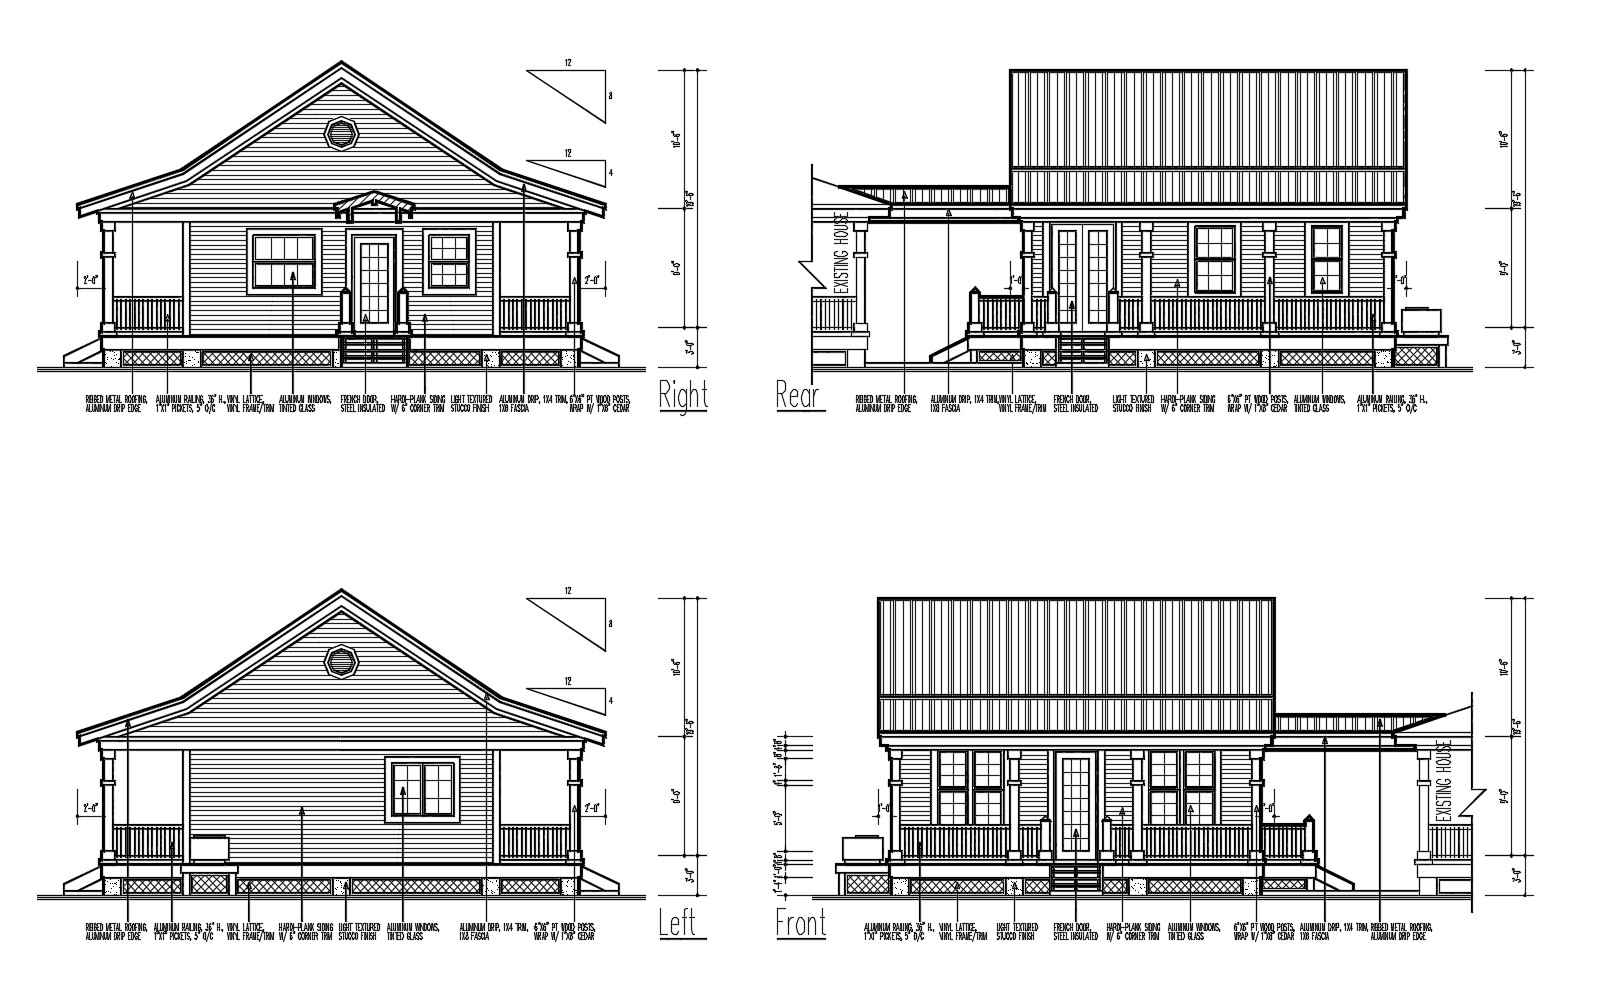  Elevation  drawing  of a house  with detail dimension in dwg  